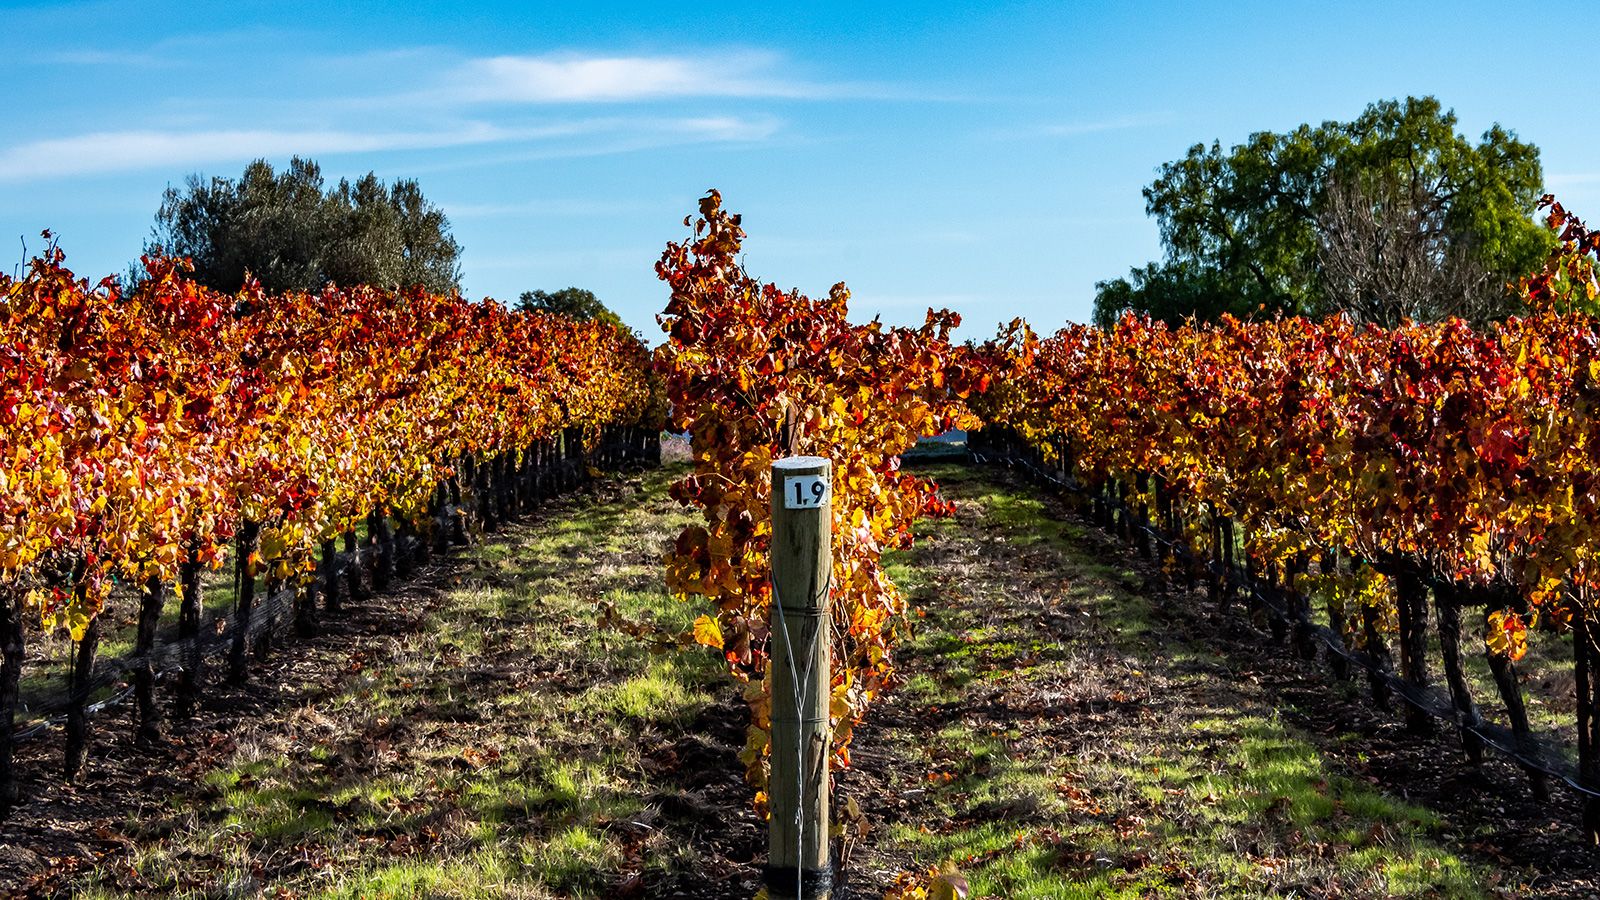 <strong>San Luis Obispo, California:</strong> The evolution of world-class wine regions in nearby Paso Robles and the Santa Ynez Valley have helped put San Luis Obispo on the tourism map.<br /> 